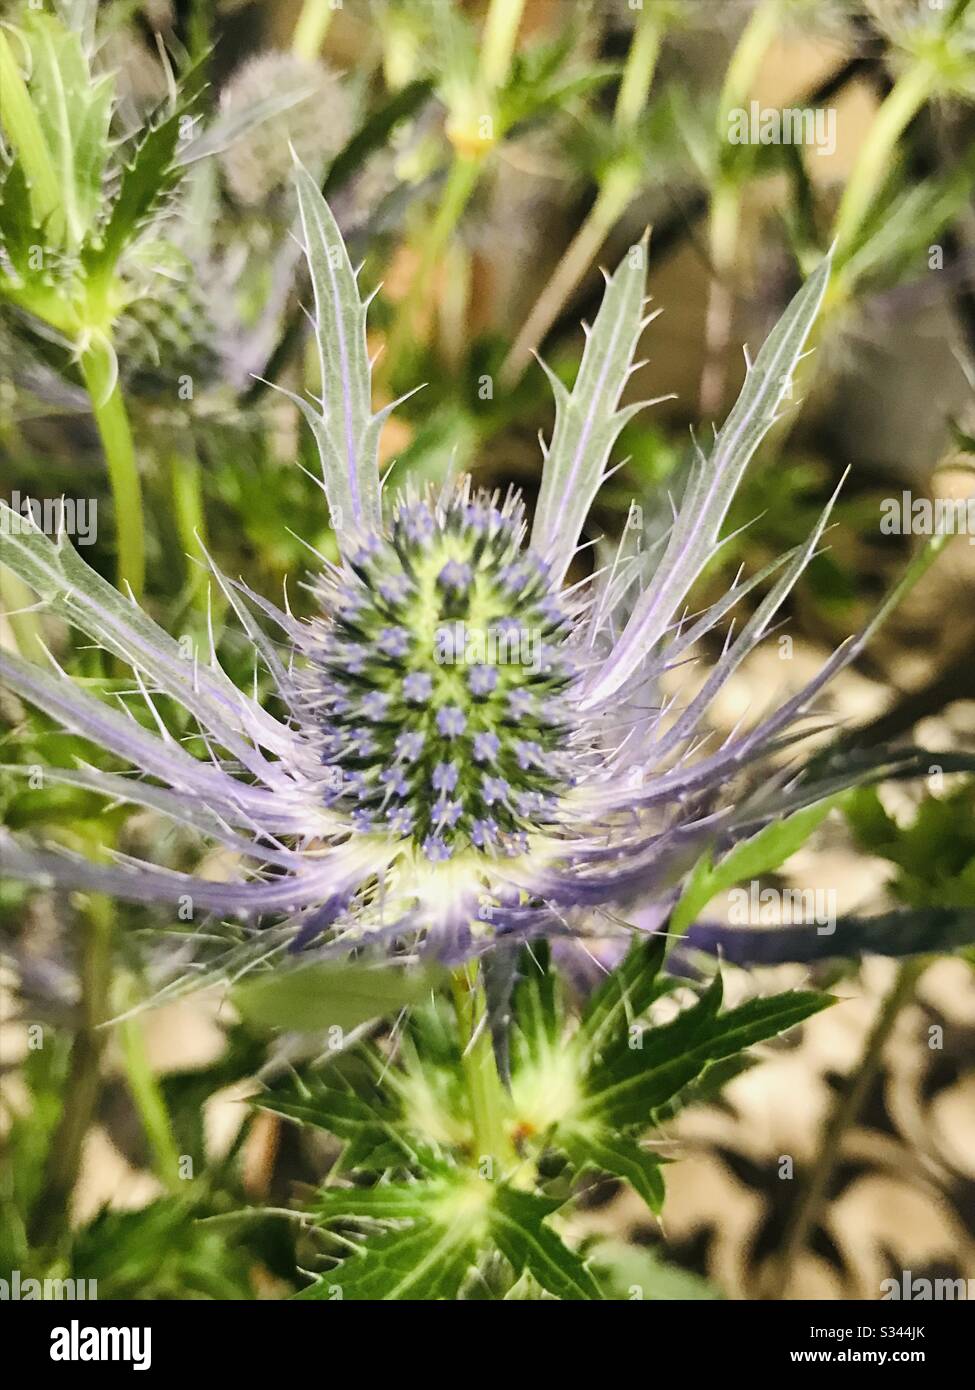 steel blue sea holly aka eryngium amethystinium ,Fresh flowers of purple Thistle flowers ready for bouquet-used as dried flowers-leaves with sharp prickles on the margins-blue thistle flower-close up Stock Photo